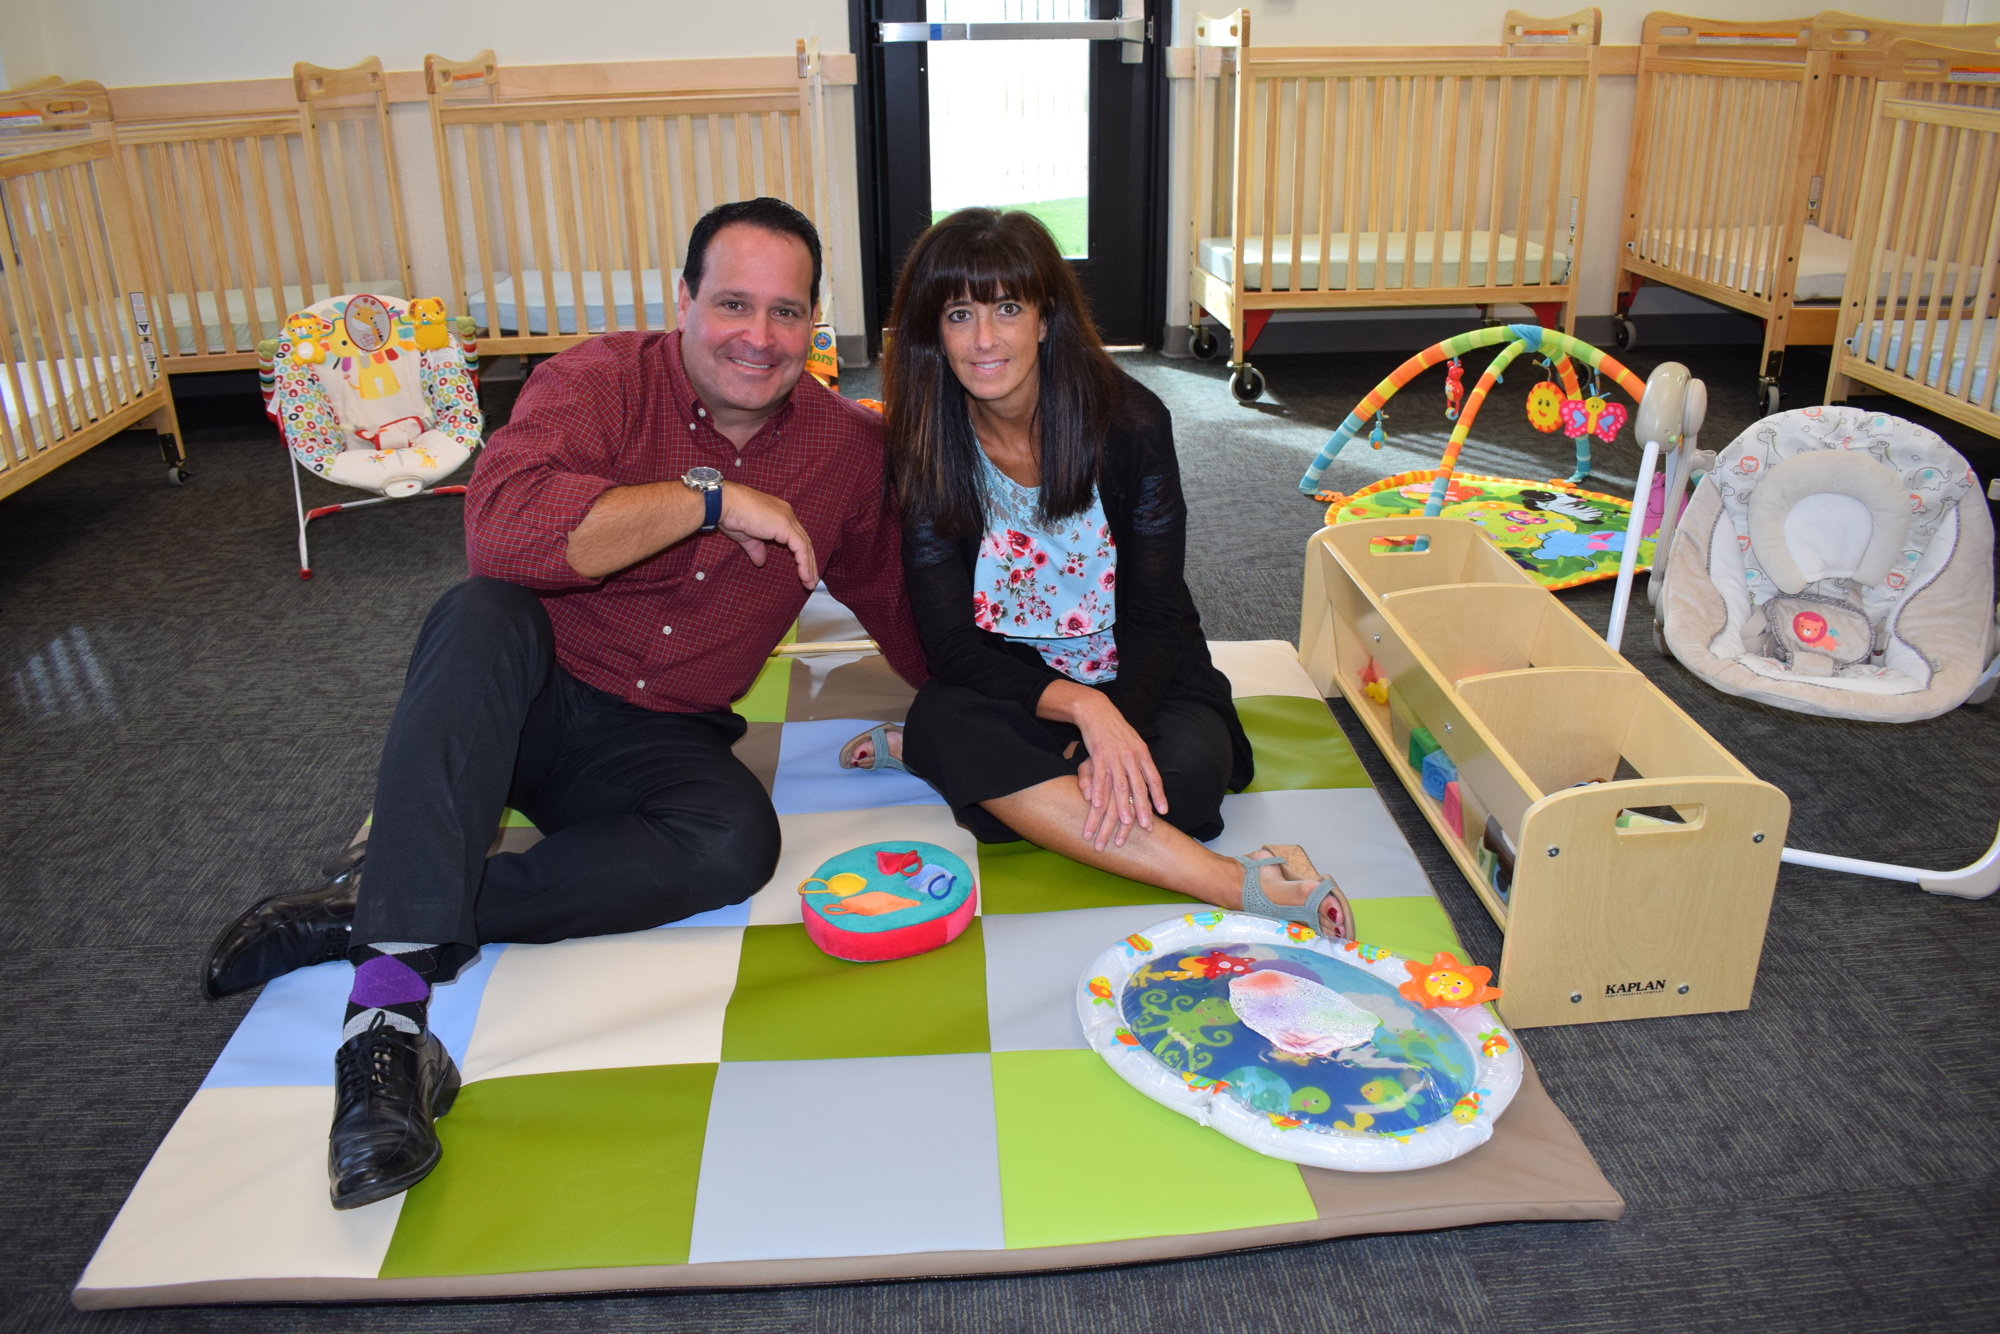 Roger and Robin Clough have opened a Discovery Point Child Development Center in East County.